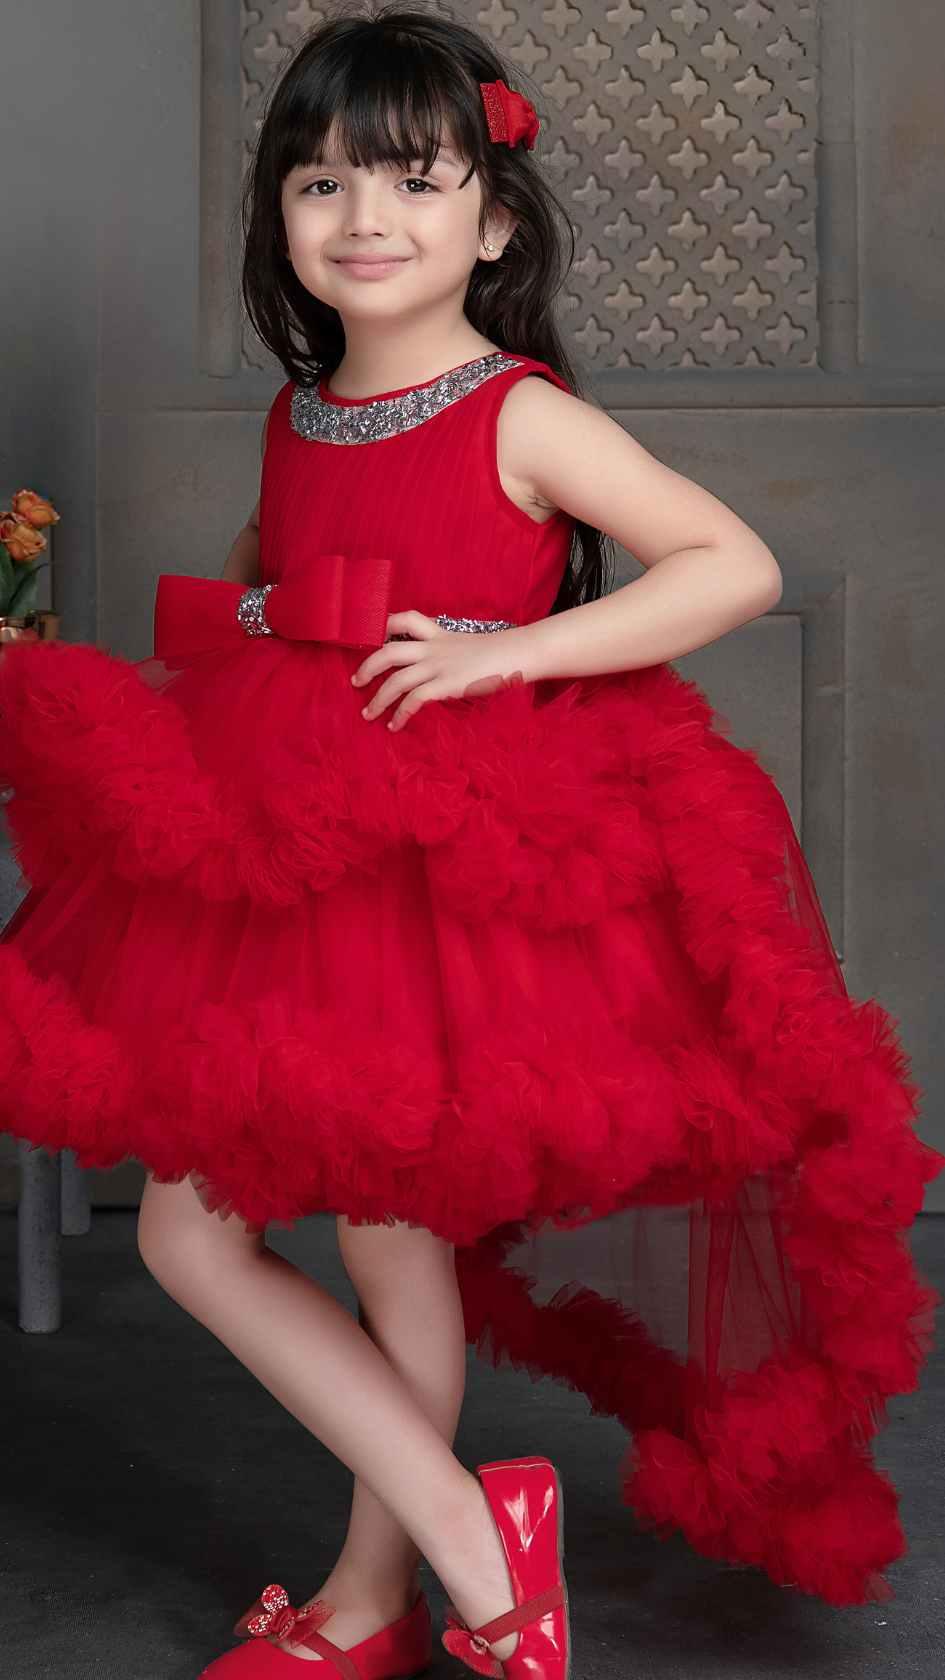 Red Net Tailback Frock With Bow Embellishment For Girls - Lagorii Kids